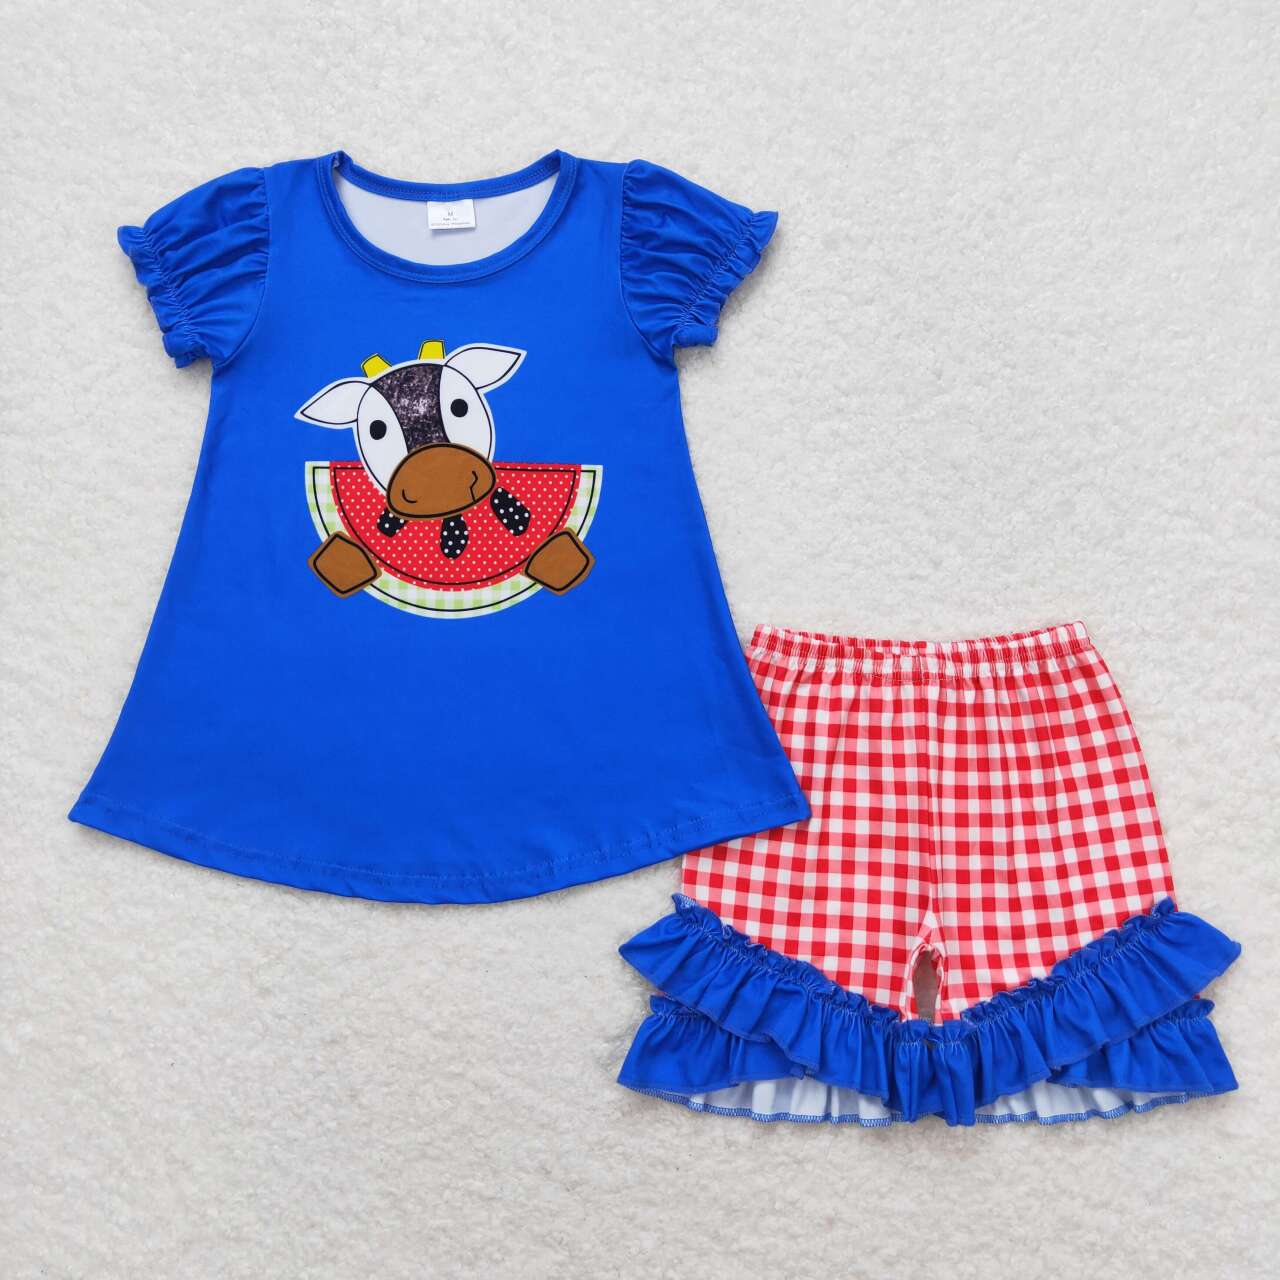 GSSO1048 Kids Girls summer clothes short sleeve top with shorts set